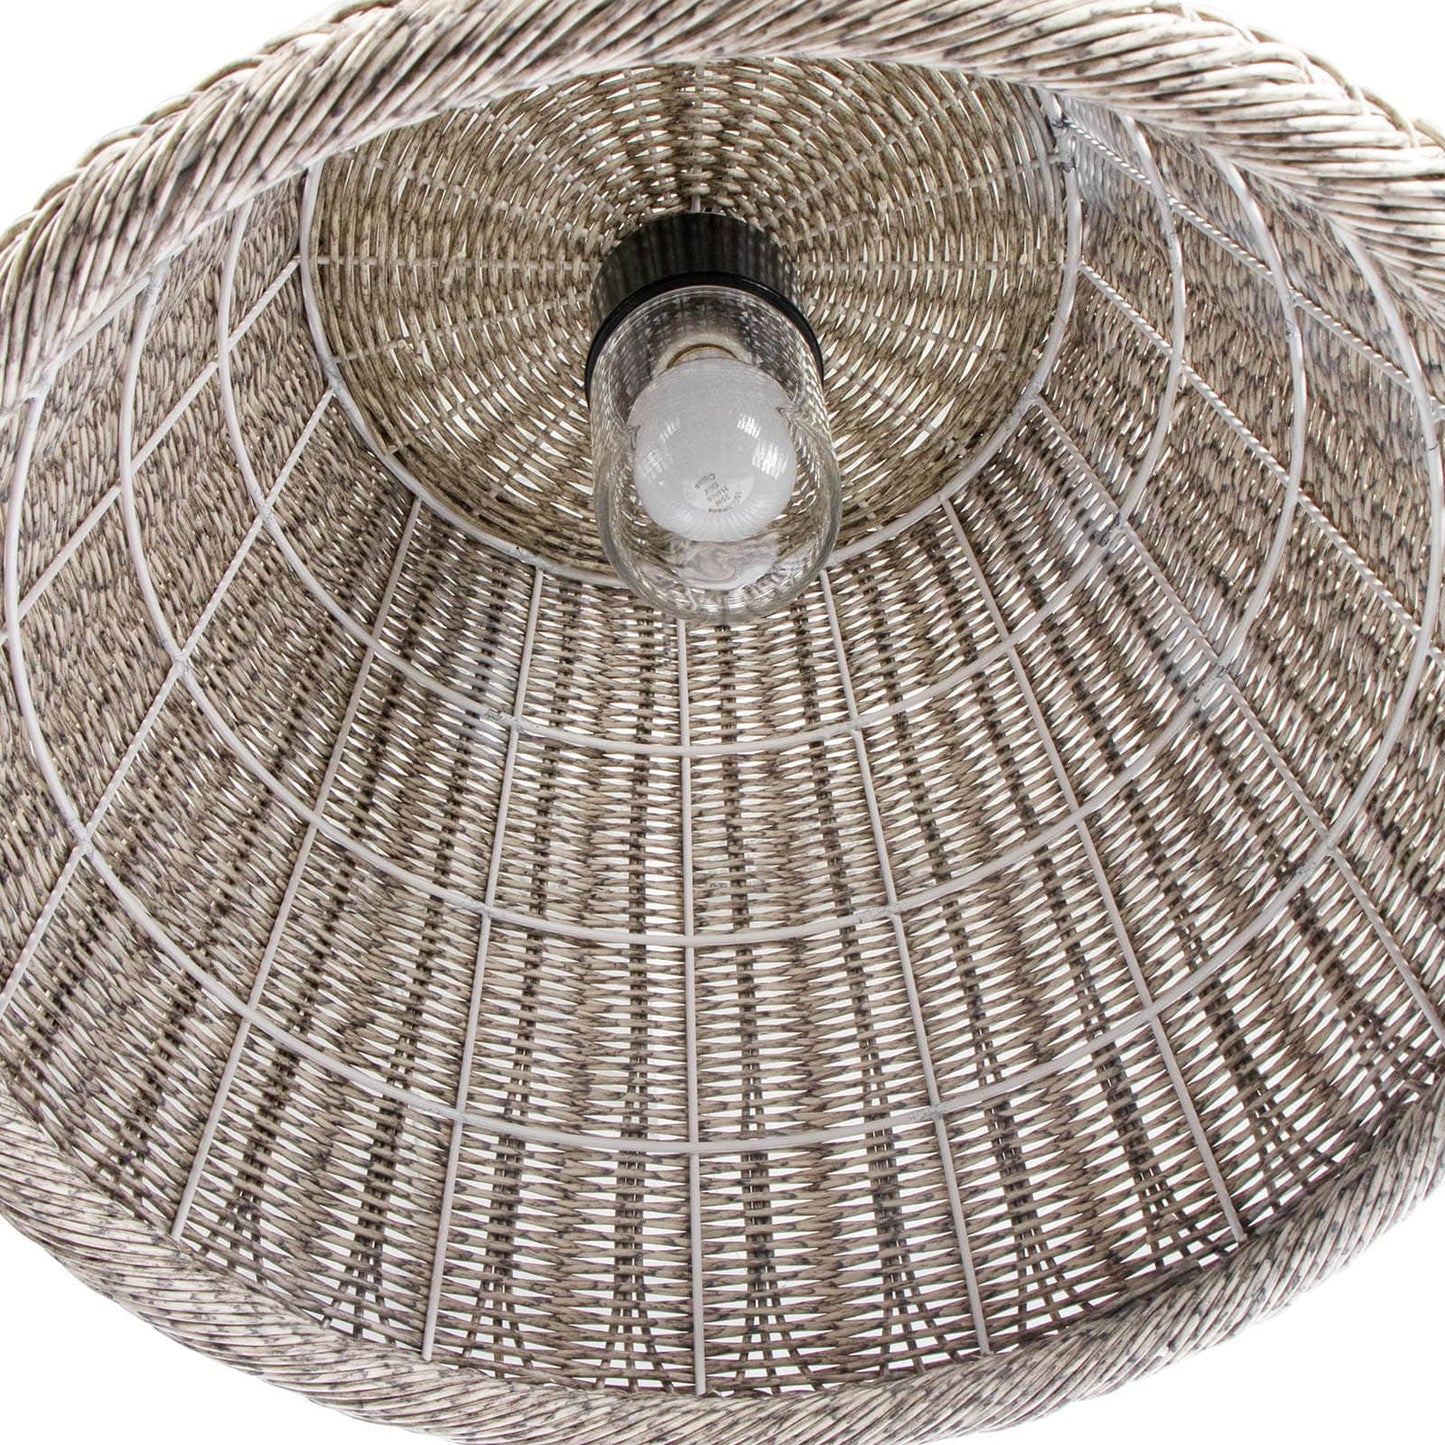 Coastal Living Augustine Outdoor Pendant Large in Weathered White